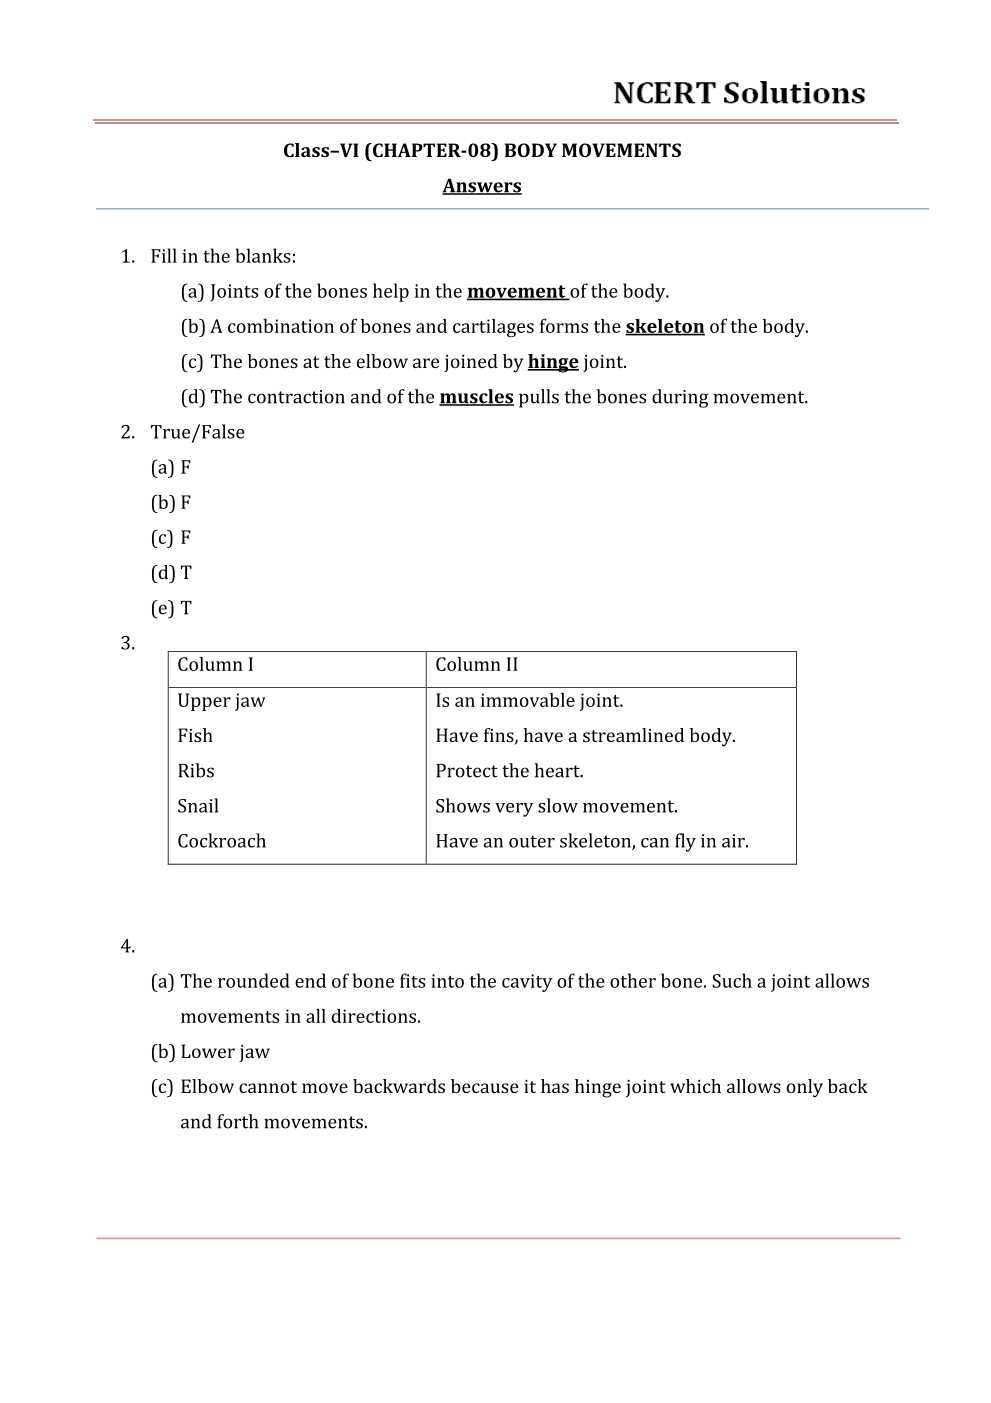 NCERT Solutions For Class 6 Science Chapter 8